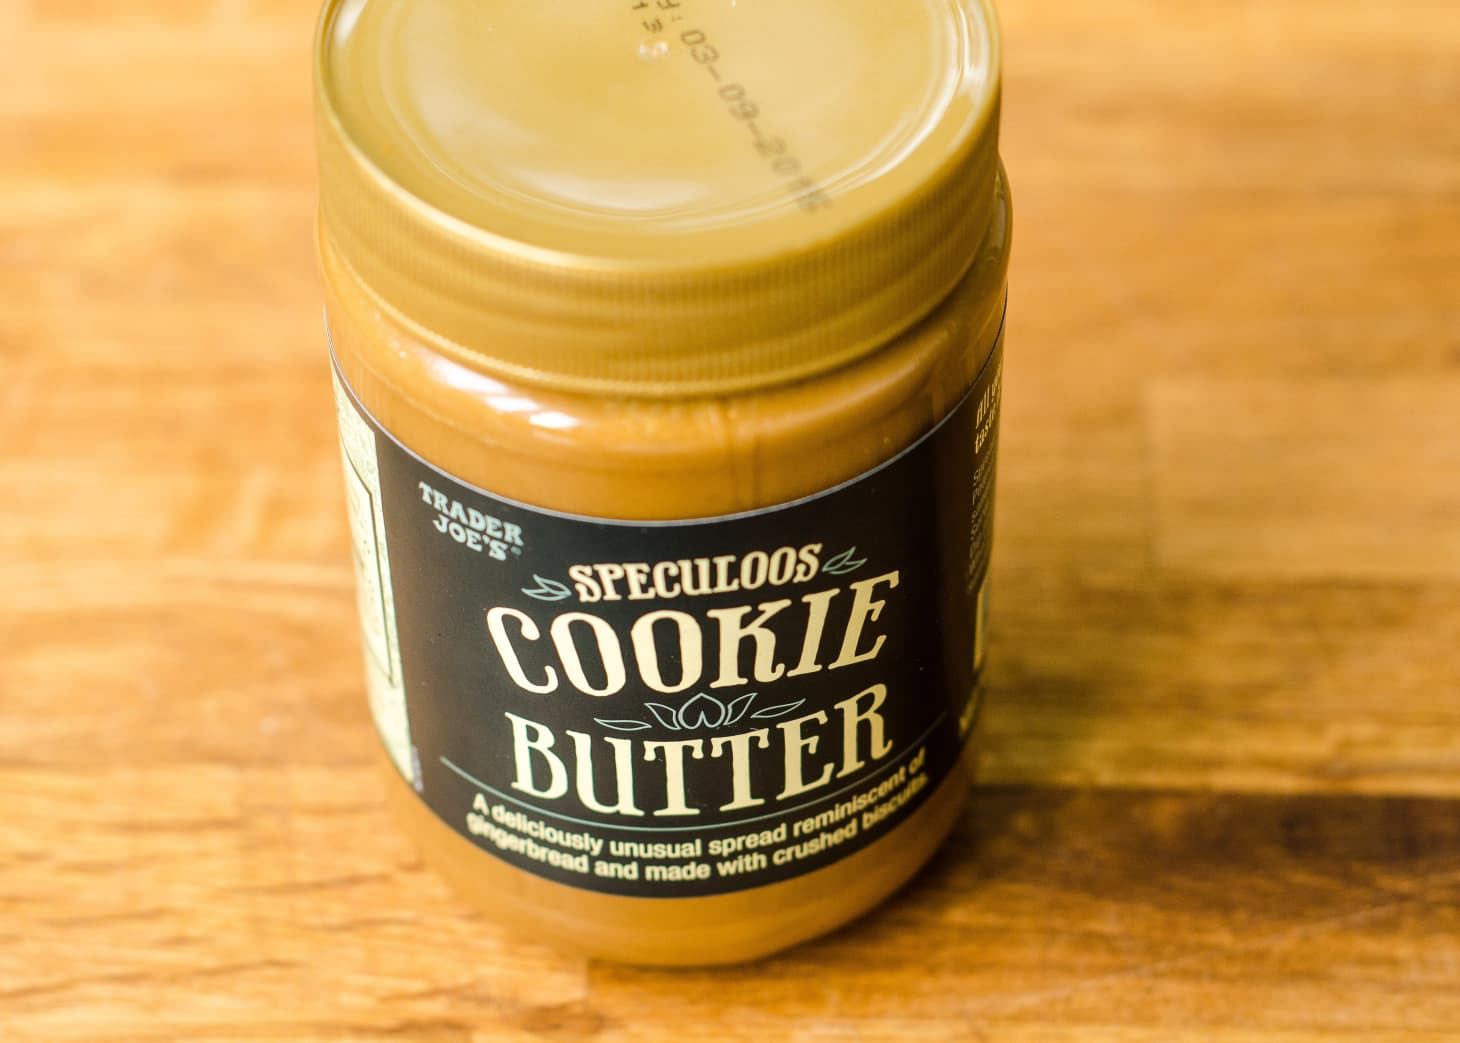 Best Trader Joe Products What To Buy At Trader Joes Kitchn